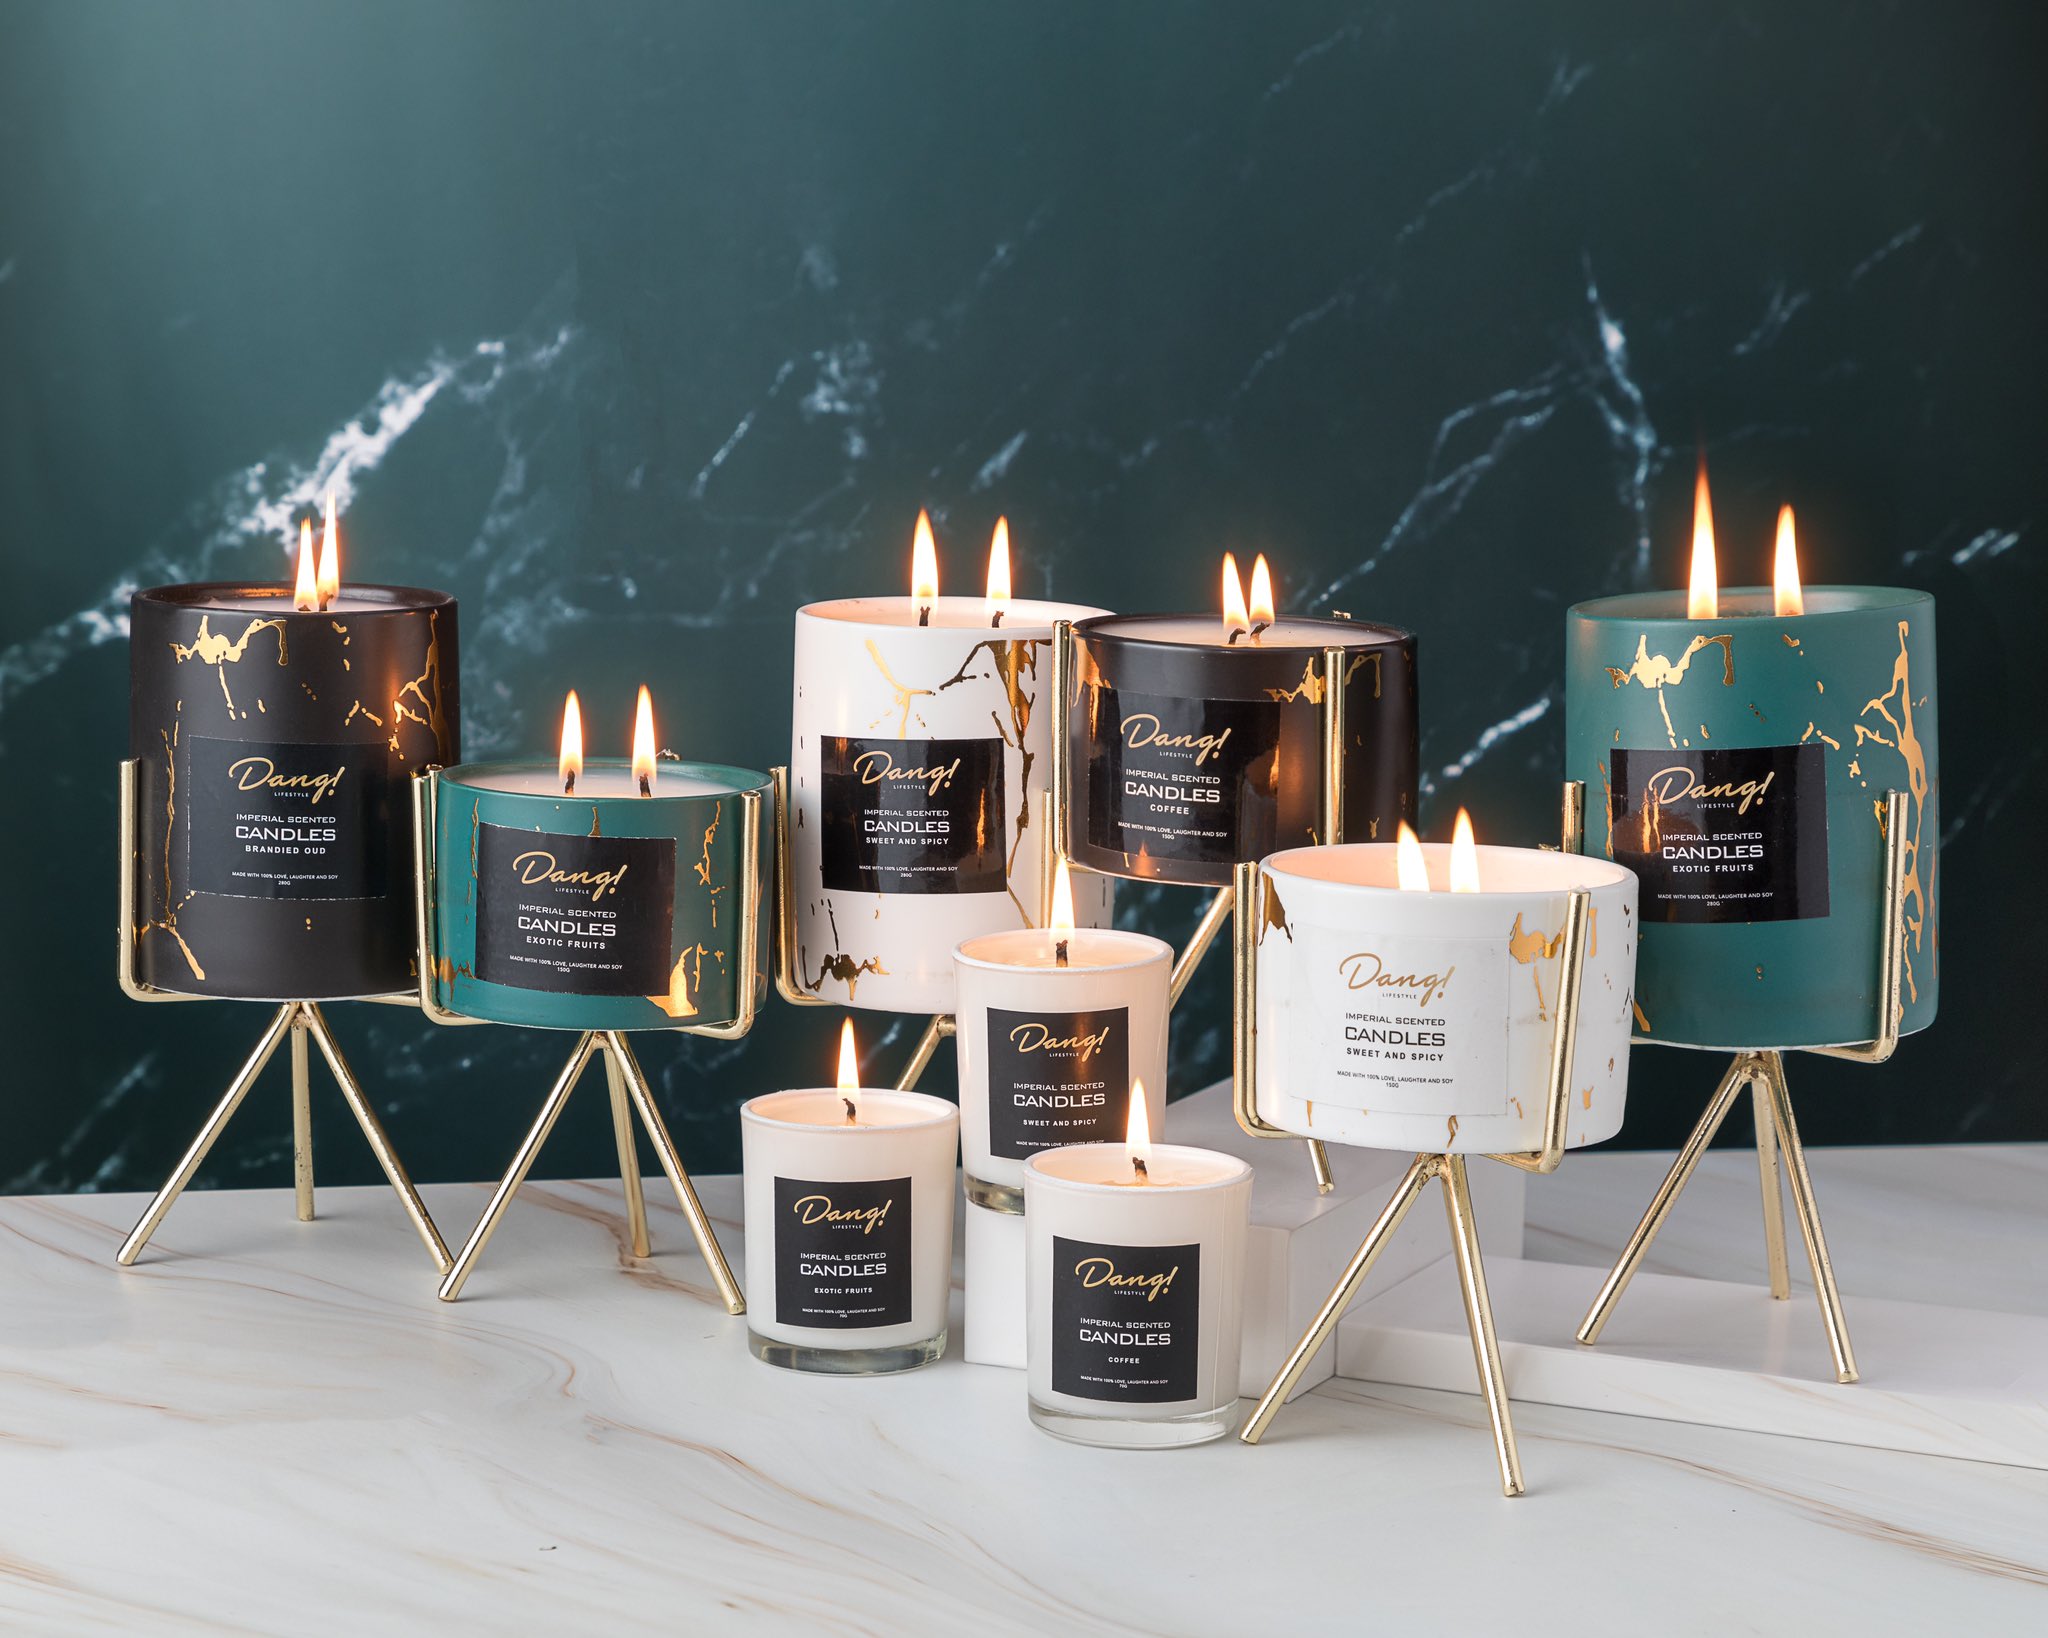 Ìfẹ́ on Twitter: "How amazing are these @danglifestyle_ scented candles?  They're selling out fast! Buy here https://t.co/juAPLL2XvQ  https://t.co/IGfVAHH5oT" / Twitter